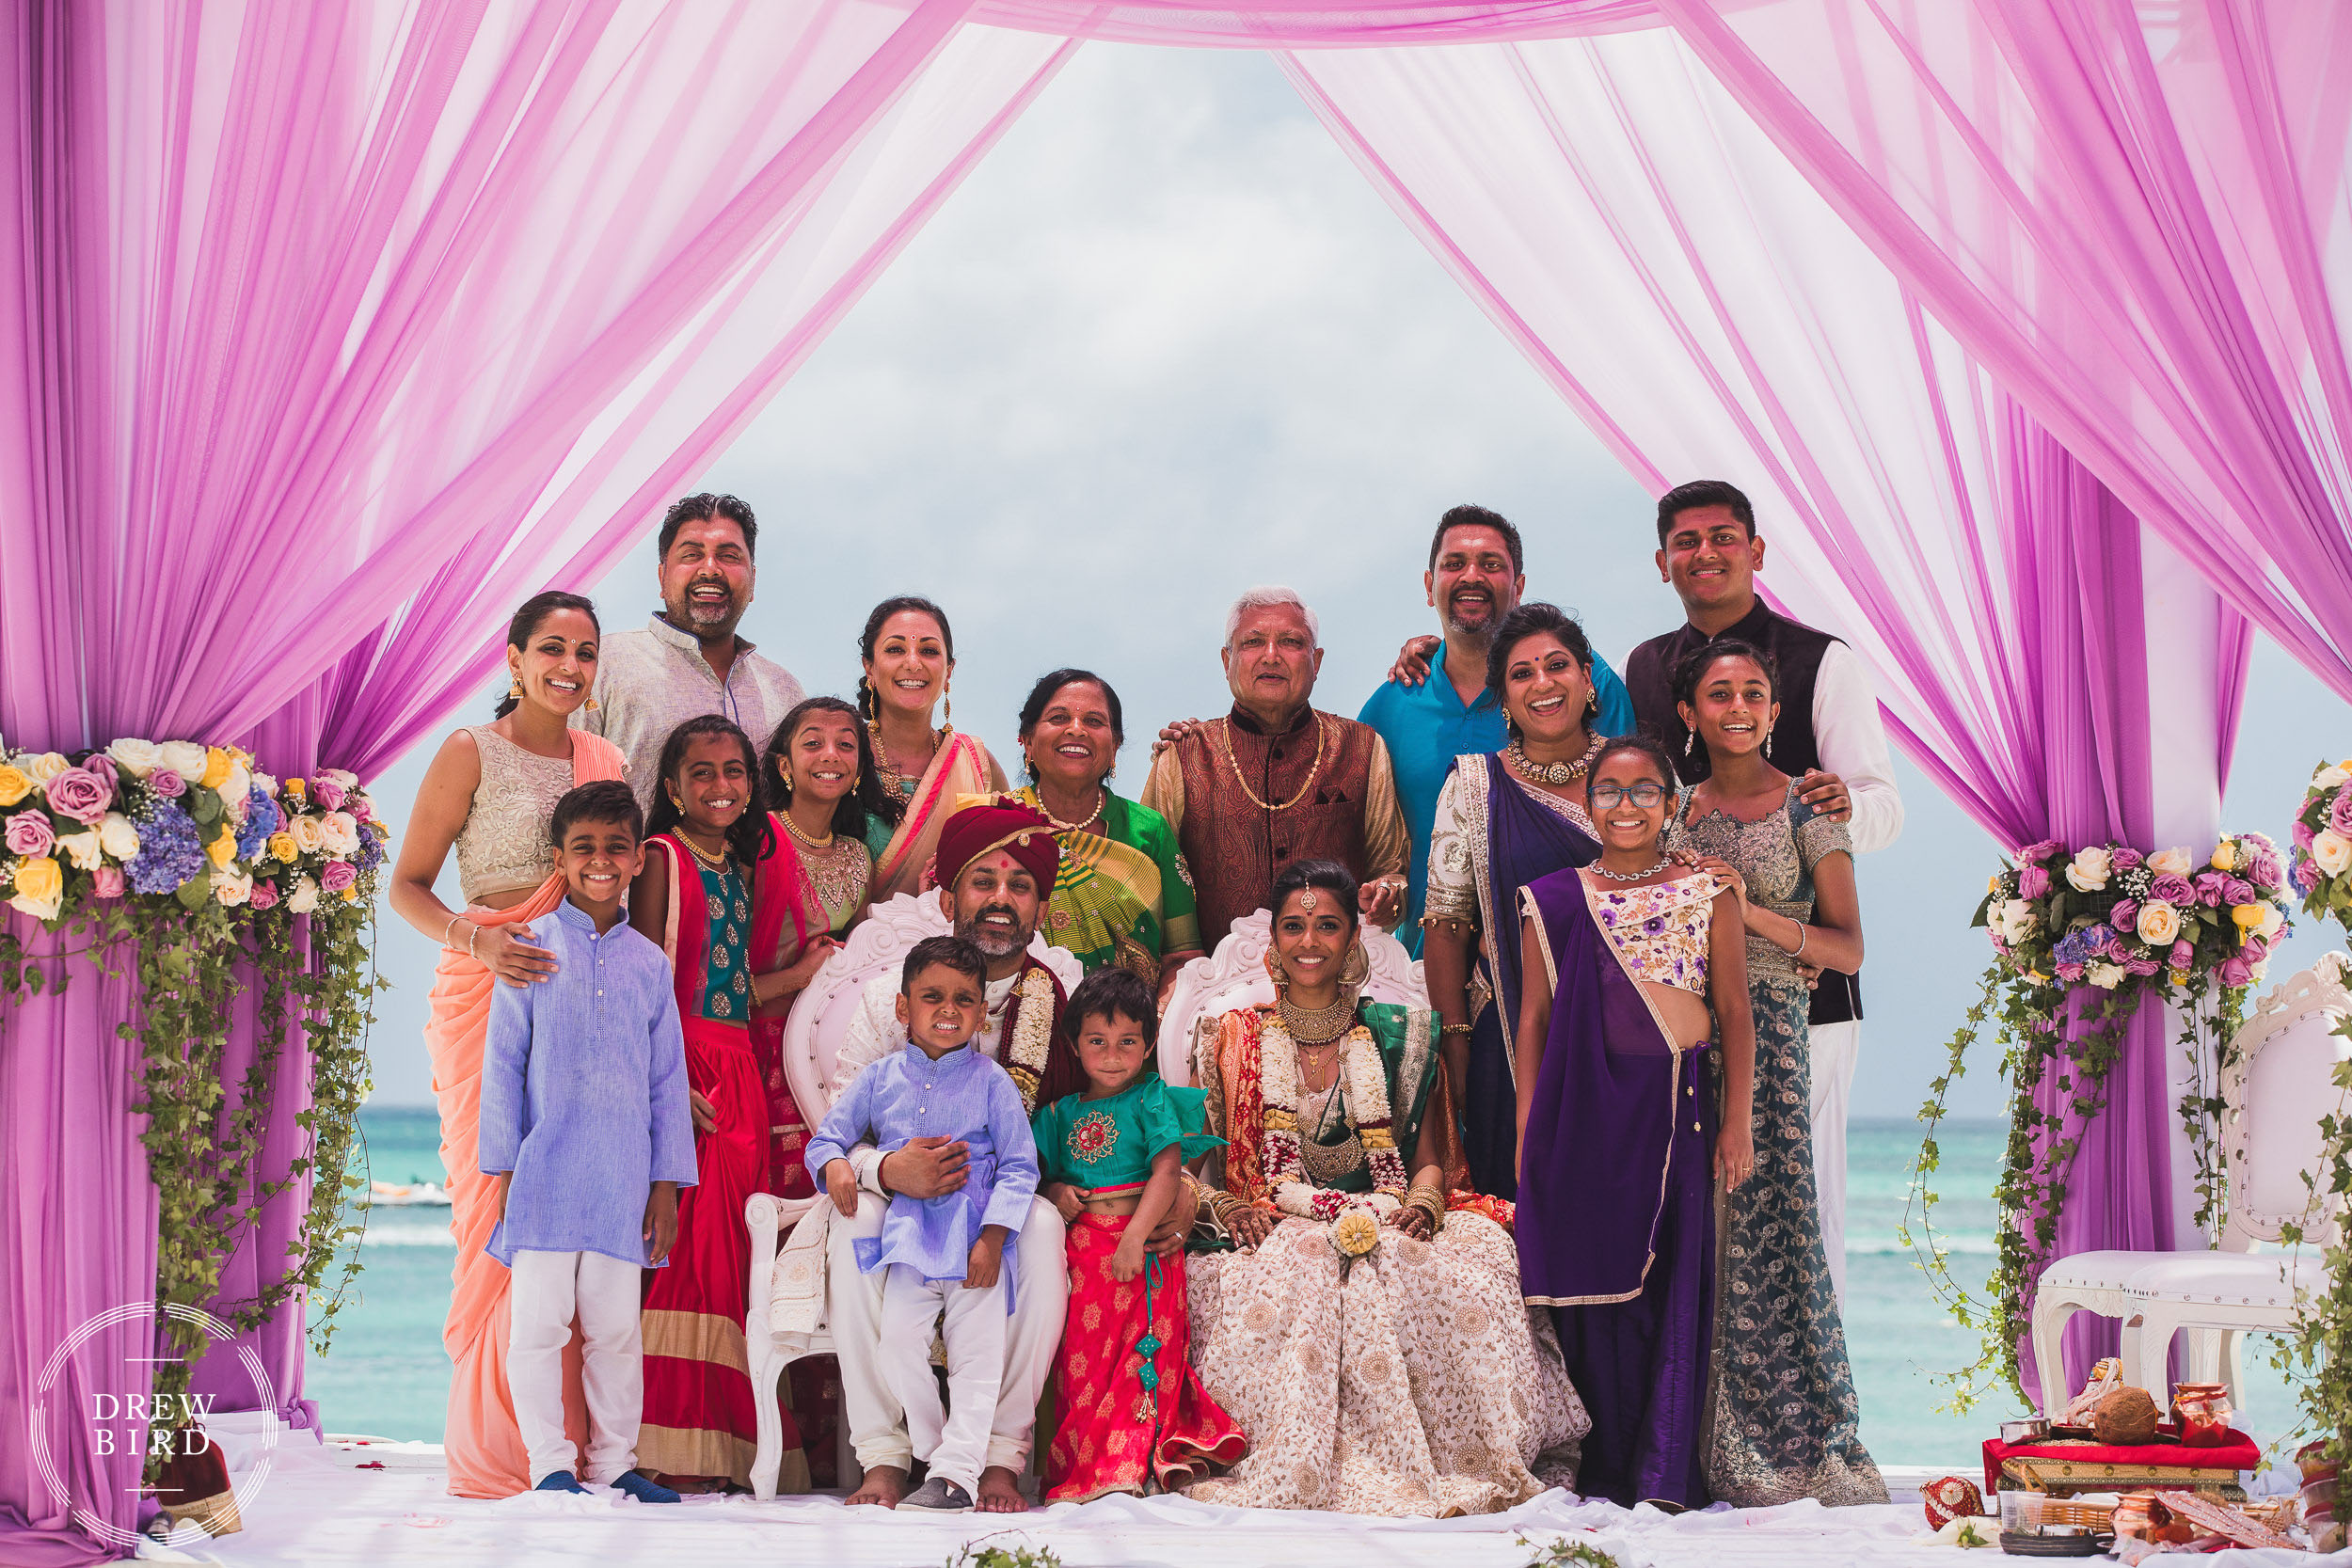 A group family portrait of a Hindu wedding couple and their family under a pink mandap on the beach with the ocean in the background following an Indian wedding ceremony at the Hilton Aruba resort in the Caribbean by SF photographer Drew Bird who specializes in documentary style Indian wedding photography.